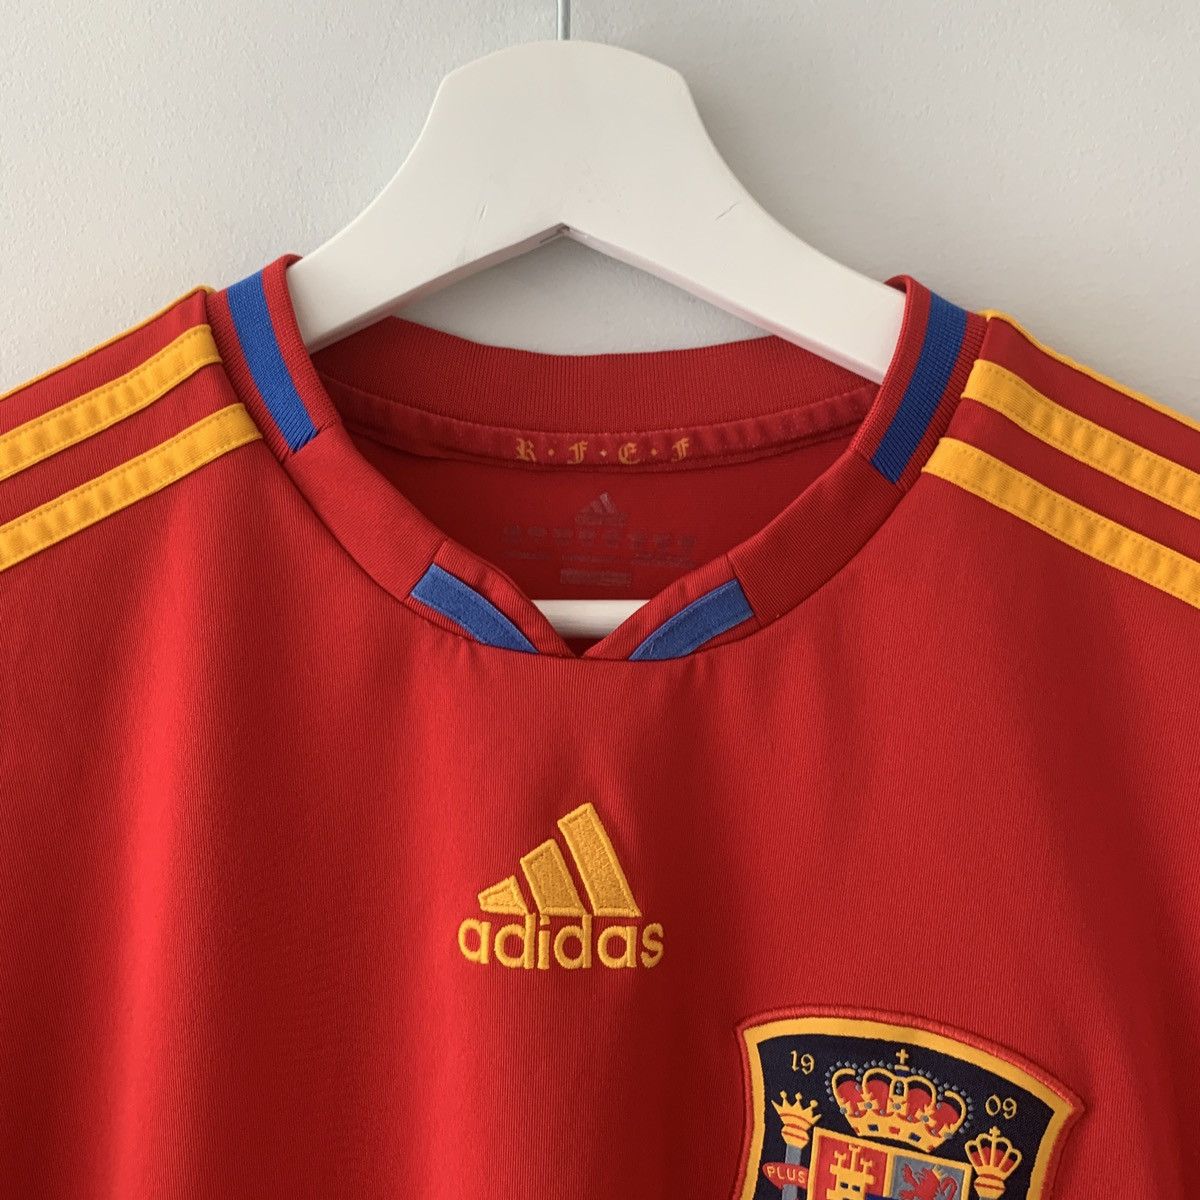 Adidas Adidas 2010 Spain RFCF Soccer Jersey World Cup Drake Style Size US M / EU 48-50 / 2 - 2 Preview